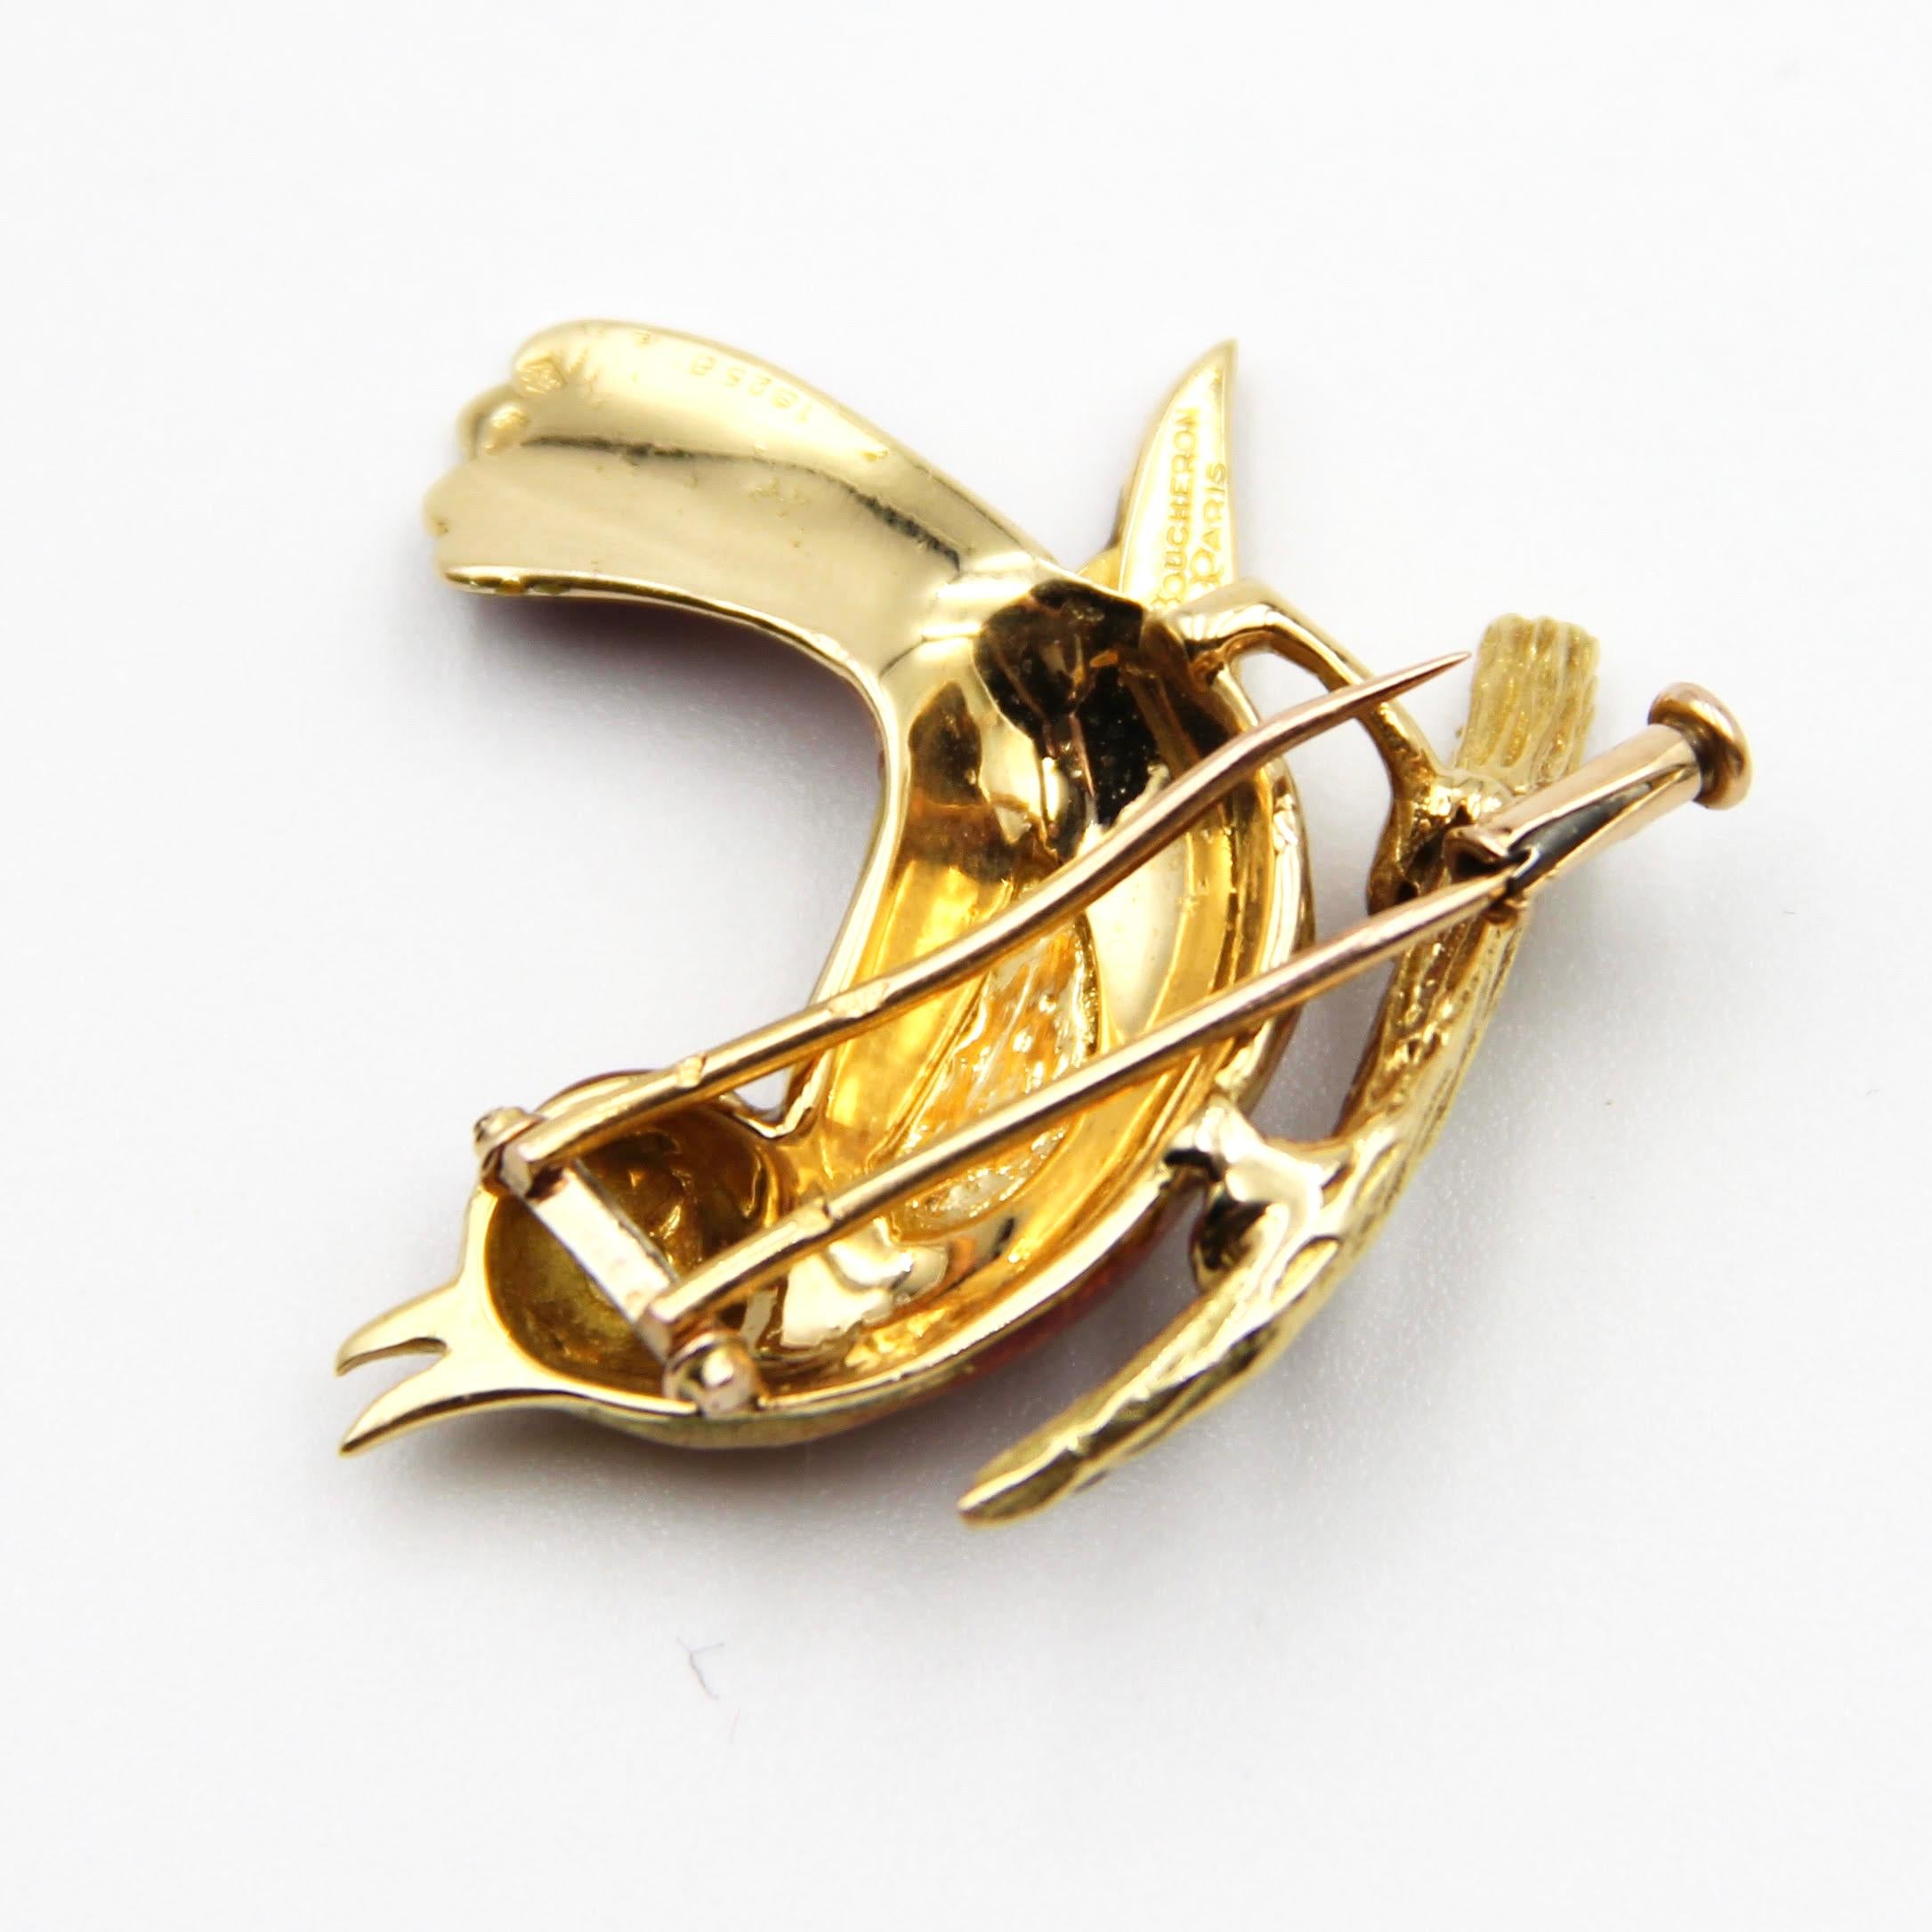 Boucheron 18k Gold Bird Brooch is with Emerald on the eye. Perfectly Designed by Boucheron . 